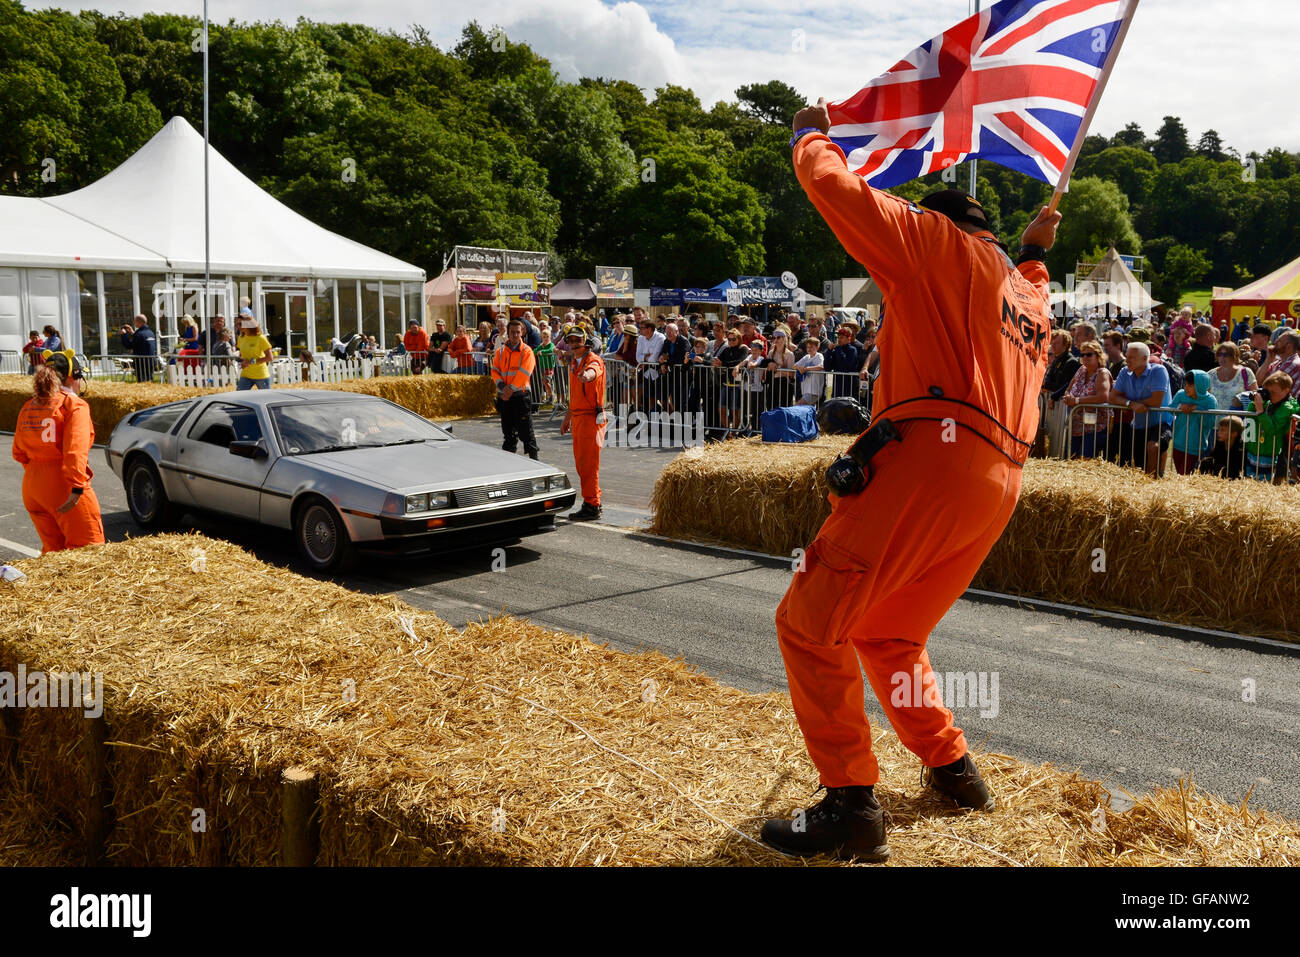 Carfest North, Bolesworth, Cheshire, UK. 30th July 2016. A Delorean at the start of the track sprint. The event is the brainchild of Chris Evans and features 3 days of cars, music and entertainment with profits being donated to the charity Children in Need. Andrew Paterson/Alamy Live News Stock Photo